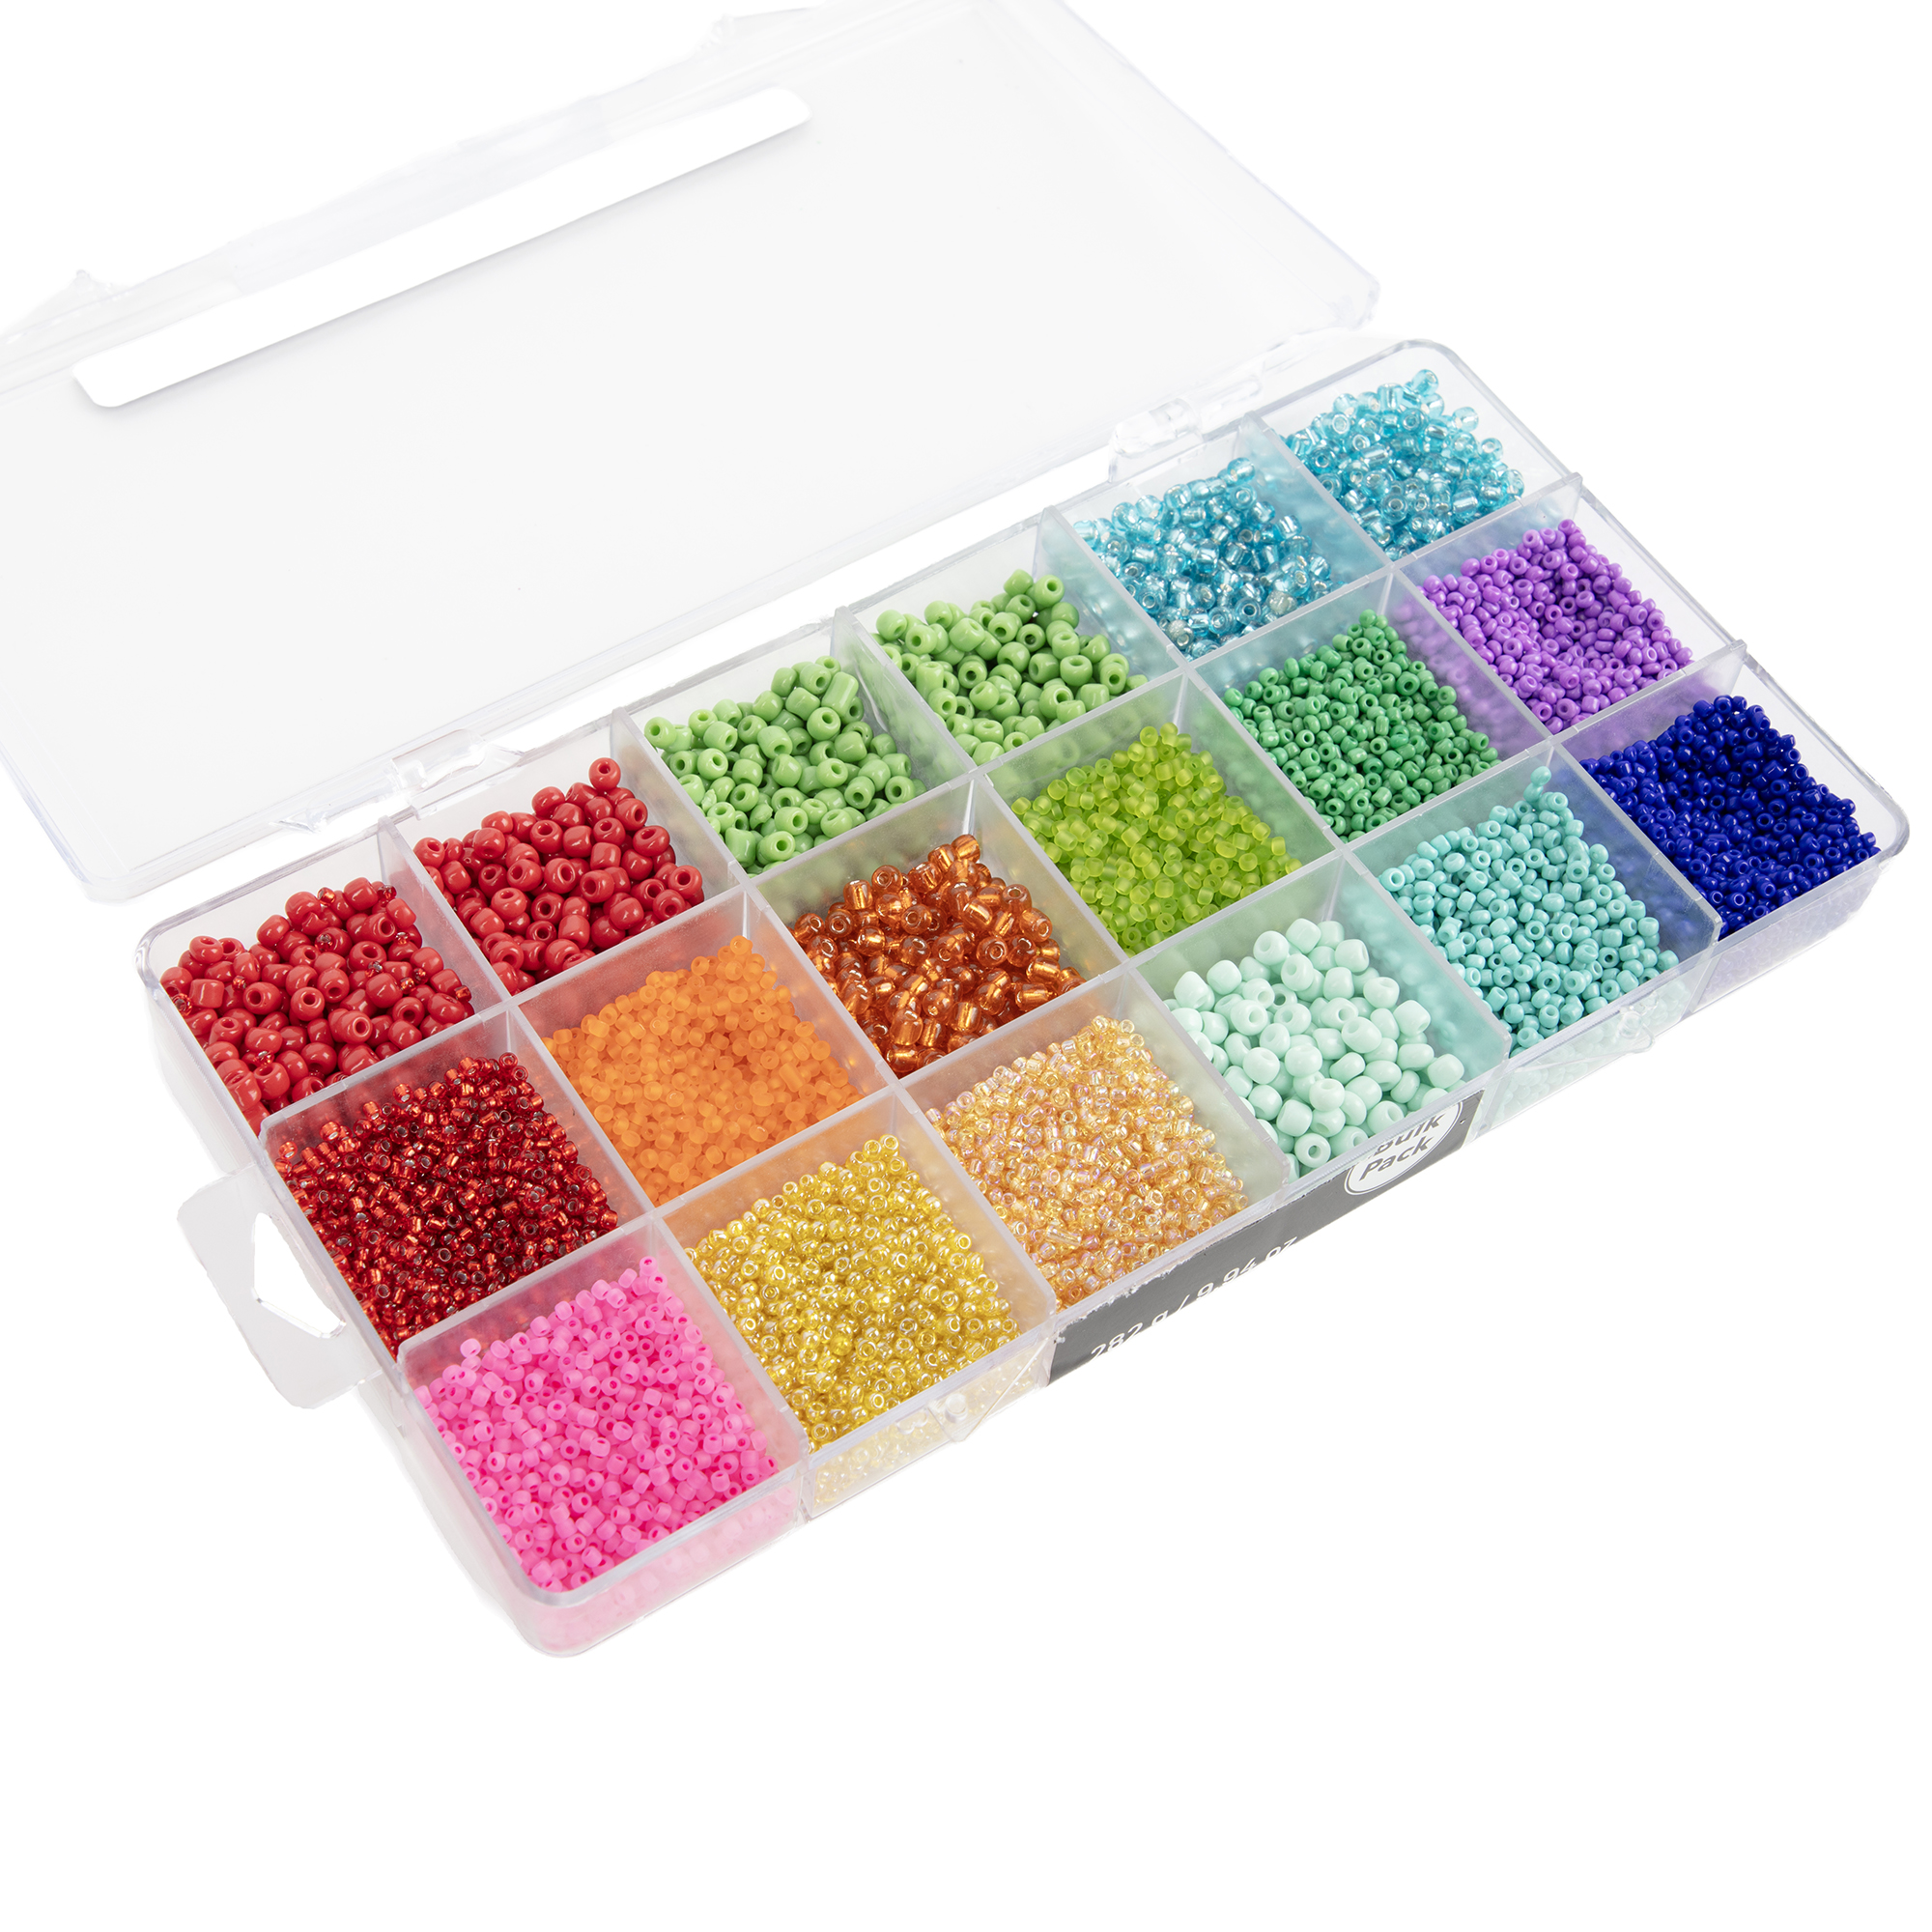 Cousin DIY Bright Rainbow Mix Glass Seed Bead Value Bulk Pack, Model AJM65022009, 1000+ Pc, Colorful Unisex Beads for Adults - image 4 of 8